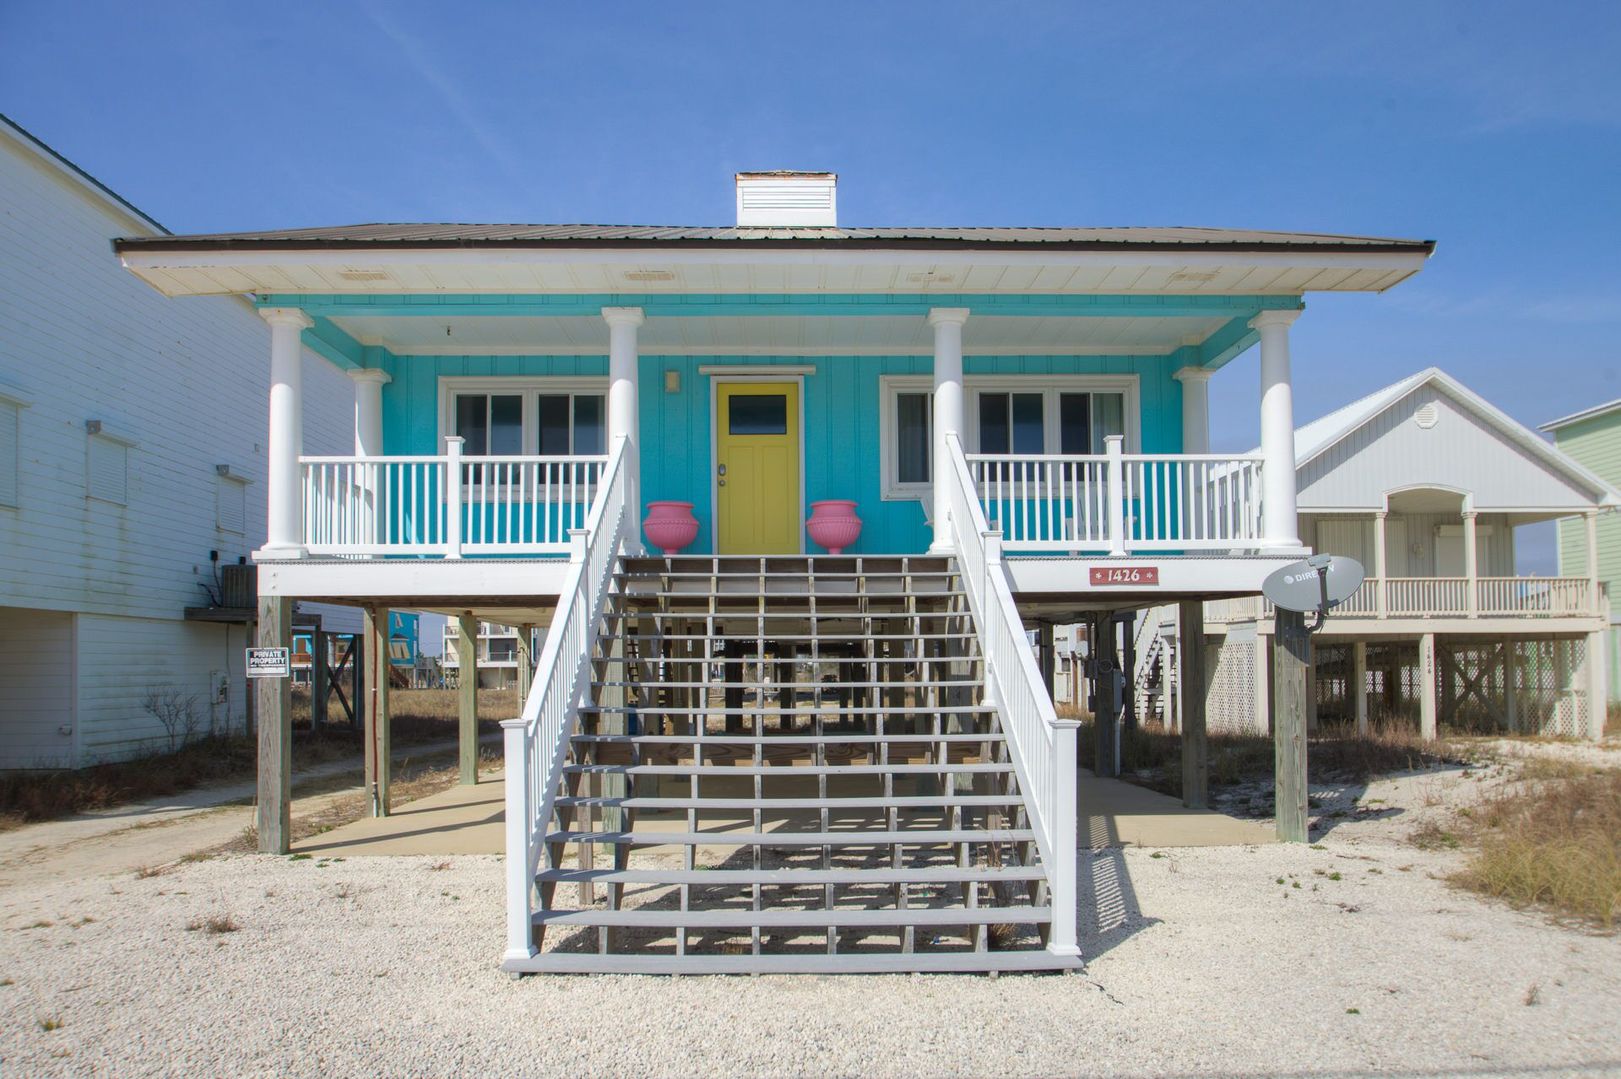 Vacation homes in Gulf Shores Alabama